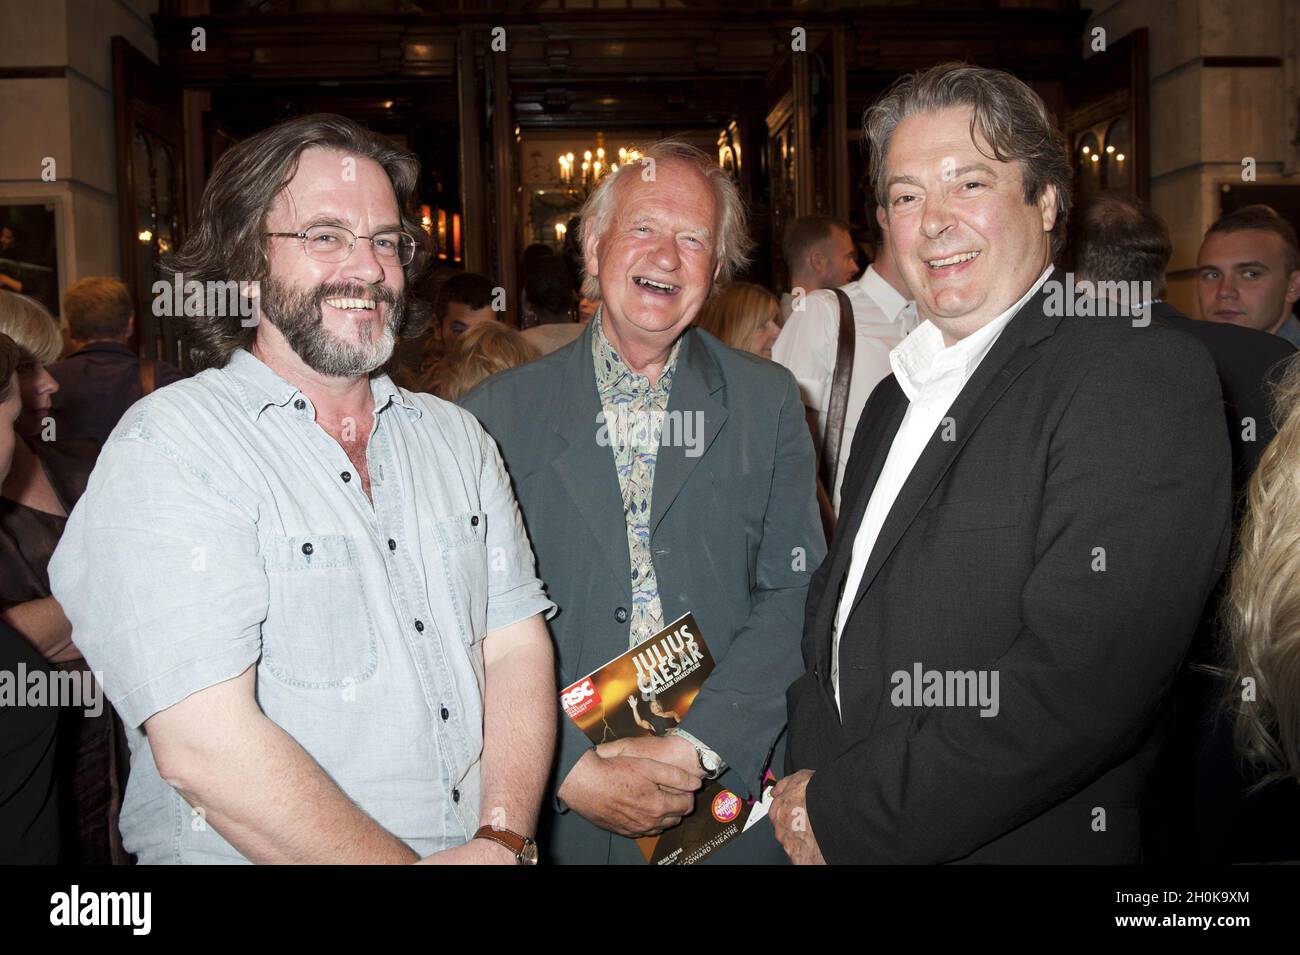 Gregory Doran (Director), Oliver Ford Davies, and Roger Allam attend the opening night of The Royal Shakespeare Company's production of Julius Caesar, at the Noel Coward Theatre, London - 15th August 2012. Stock Photo